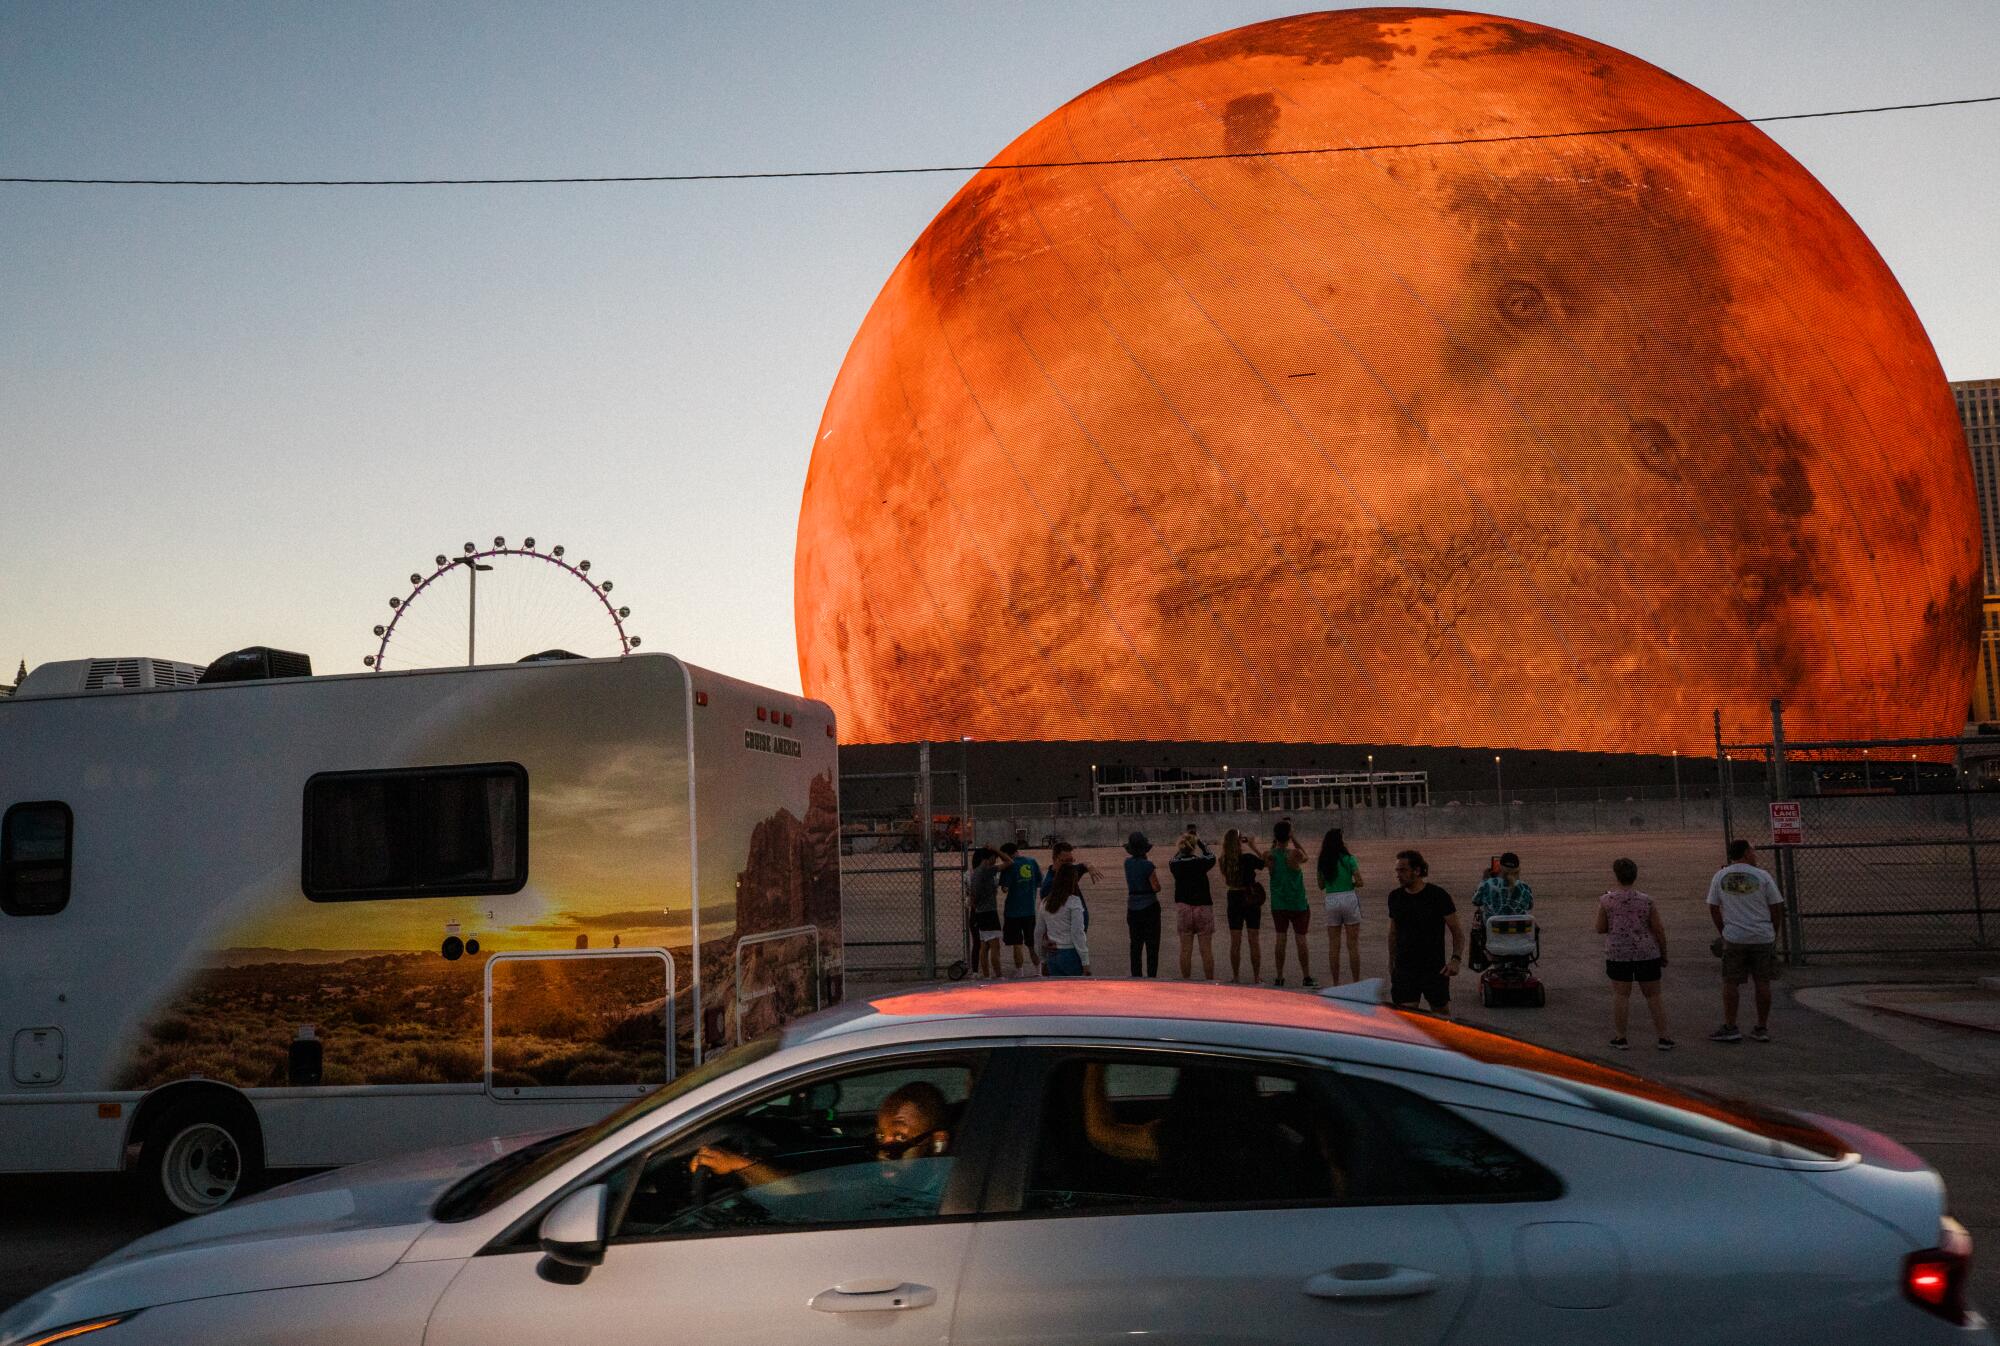 People gather on a street at dusk to watch Sphere broadcast images of a red planet. 